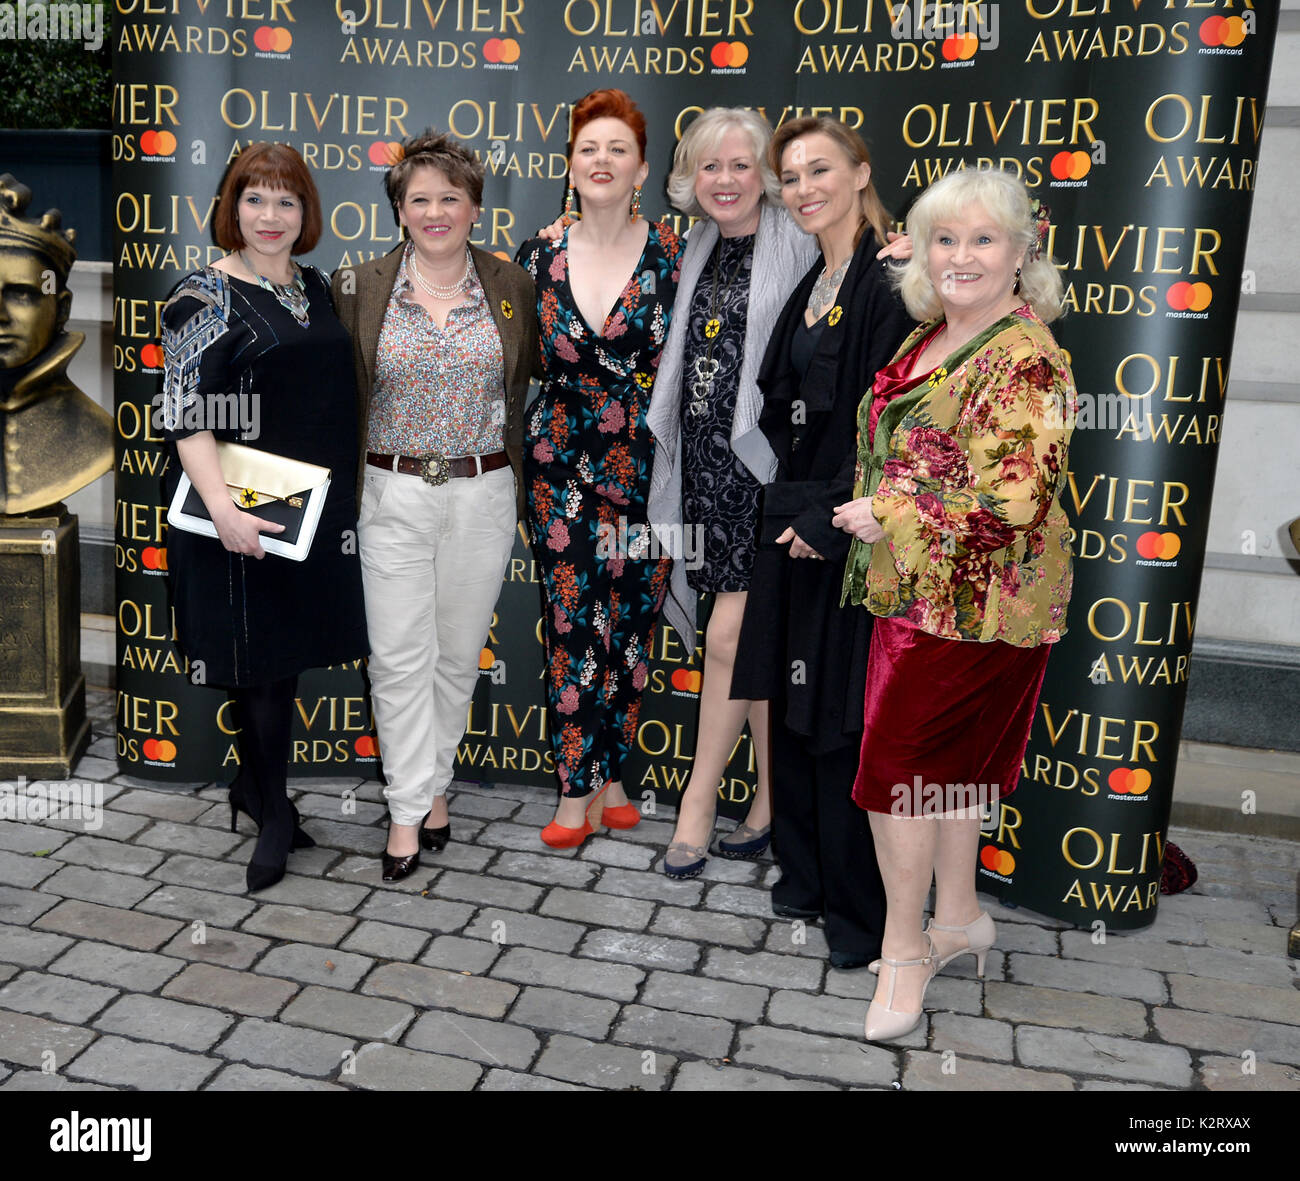 Photo Must Be Credited ©Alpha Press 078237 10/03/2017 Cast of The Girls, Debbie Chazen, Claire Machin, Sophie-Louise Dann, Claire Moore, Joanna Riding and Michele Dotrice at The Olivier Awards 2017 Nominees Luncheon held at Rosewood in London. Stock Photo